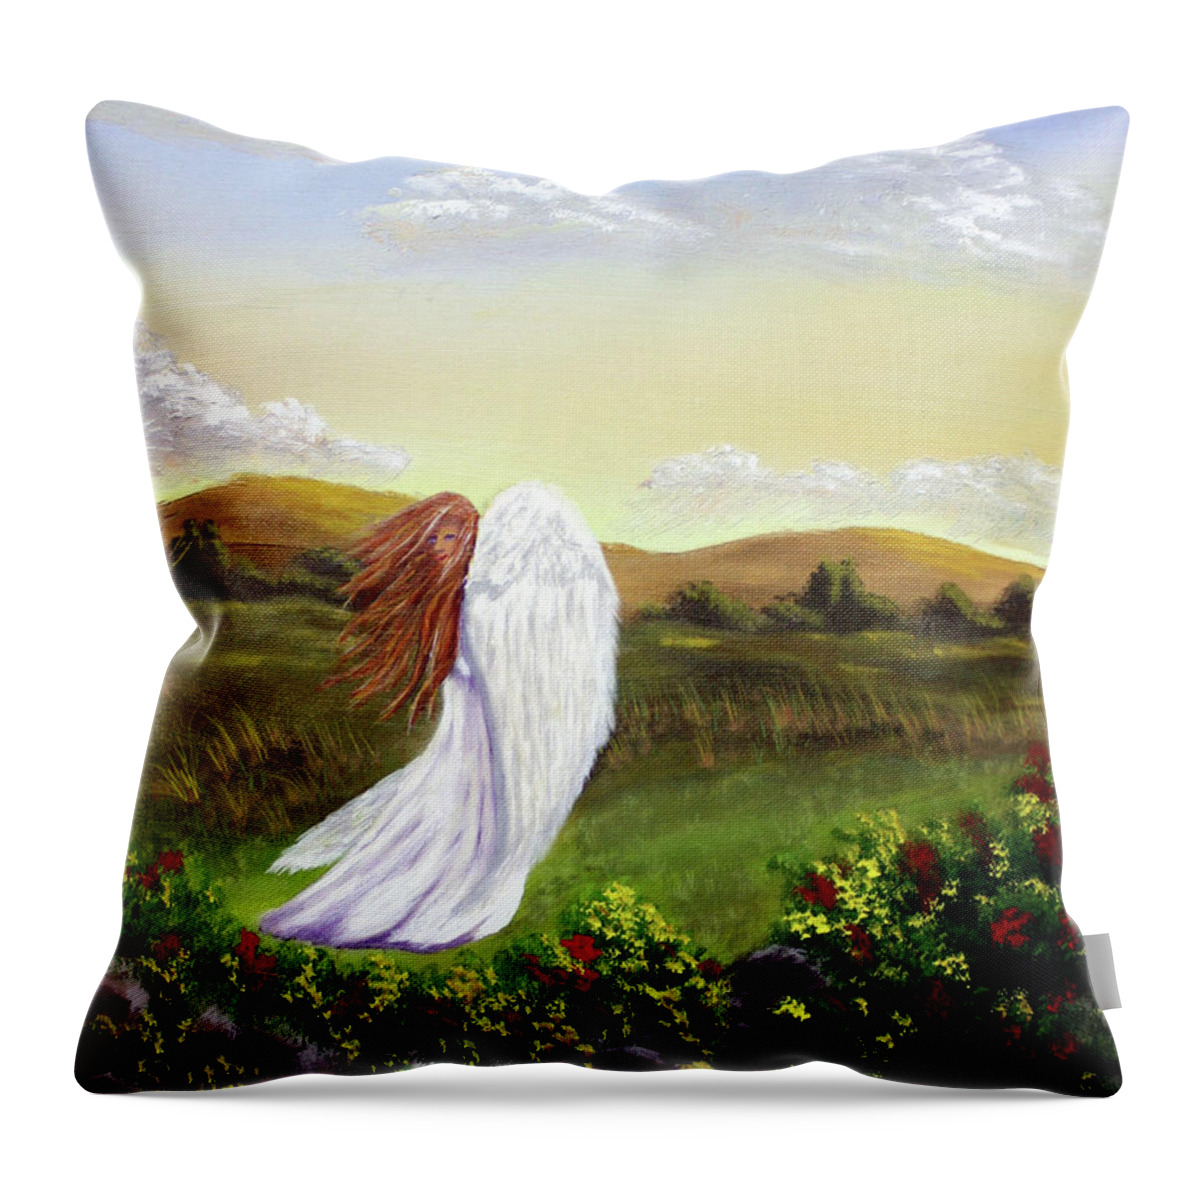 Angel Throw Pillow featuring the painting Windswept Angel by Dawn Blair